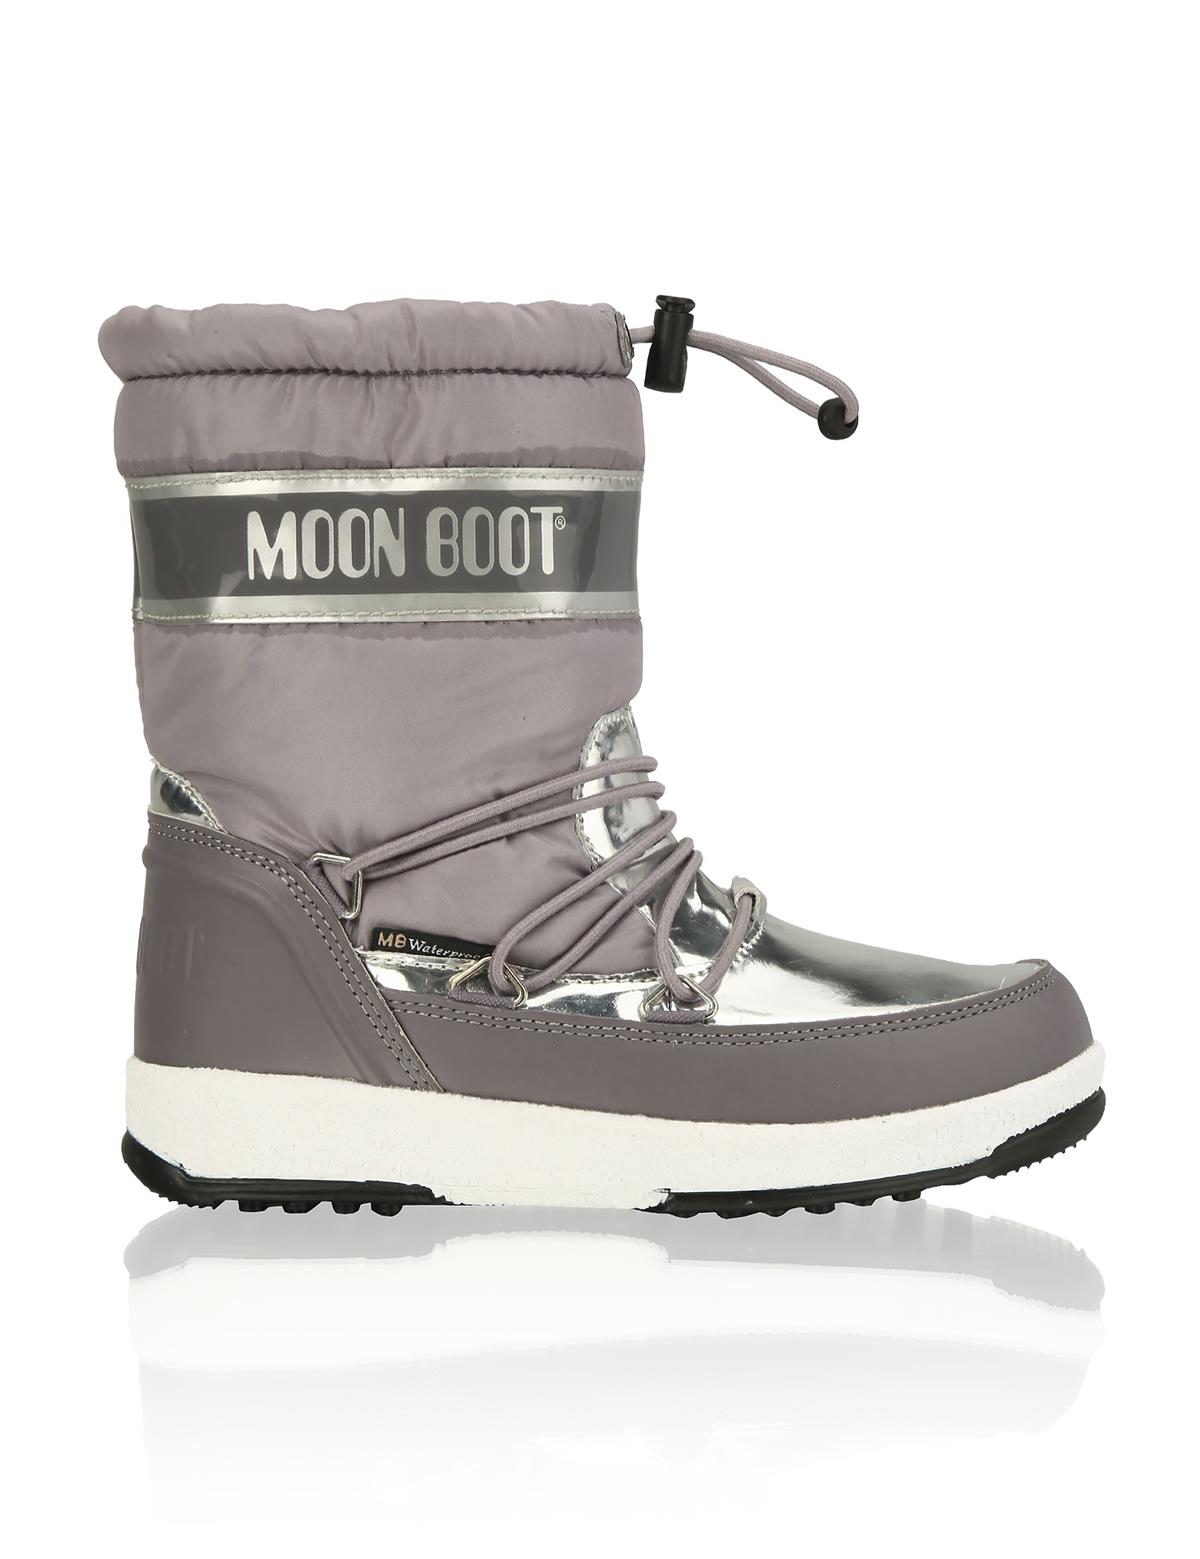 HUMANIC 111 Moon Boots Kids Snow Boot EUR 84,95 3623800324